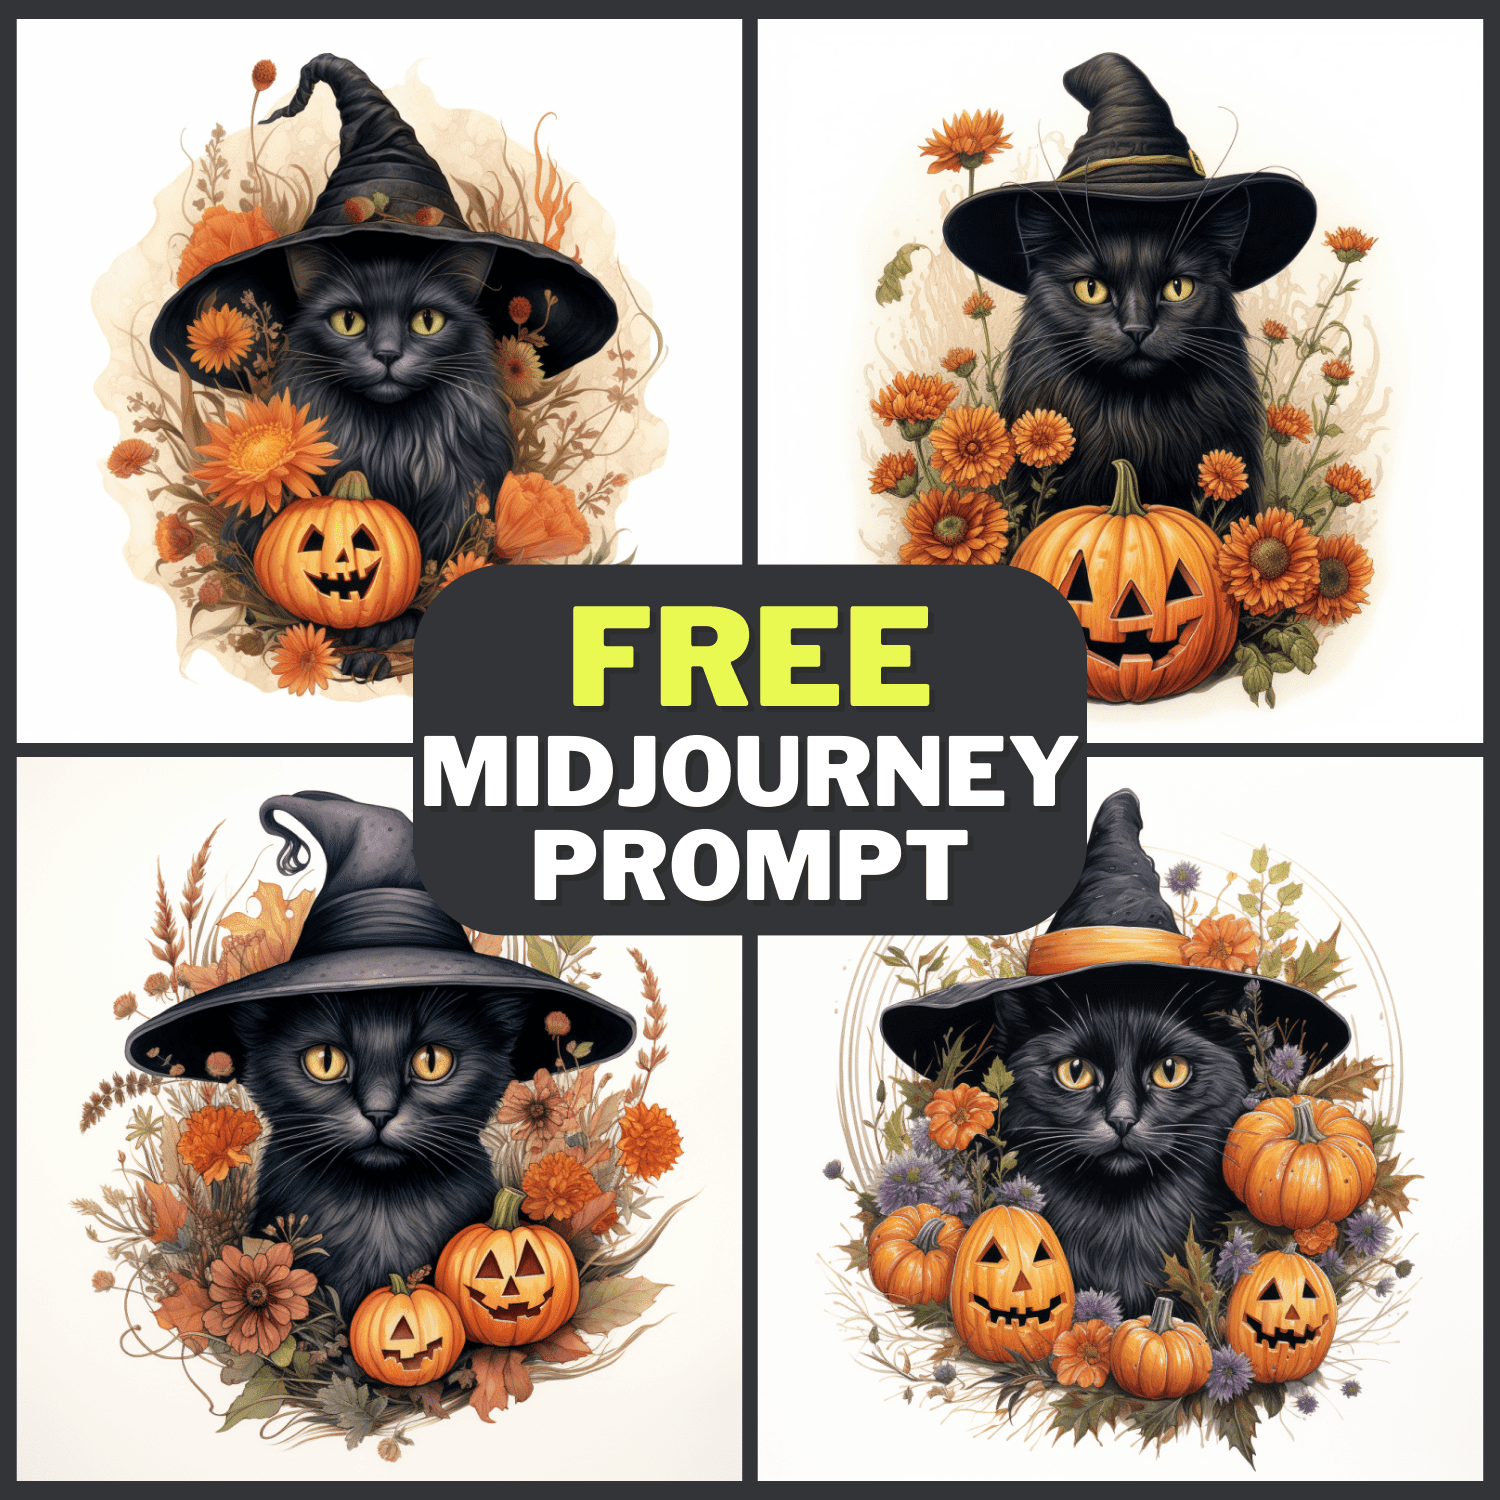 Halloween Black Cat With Pumpkins And Flowers Free Midjourney Prompt 1